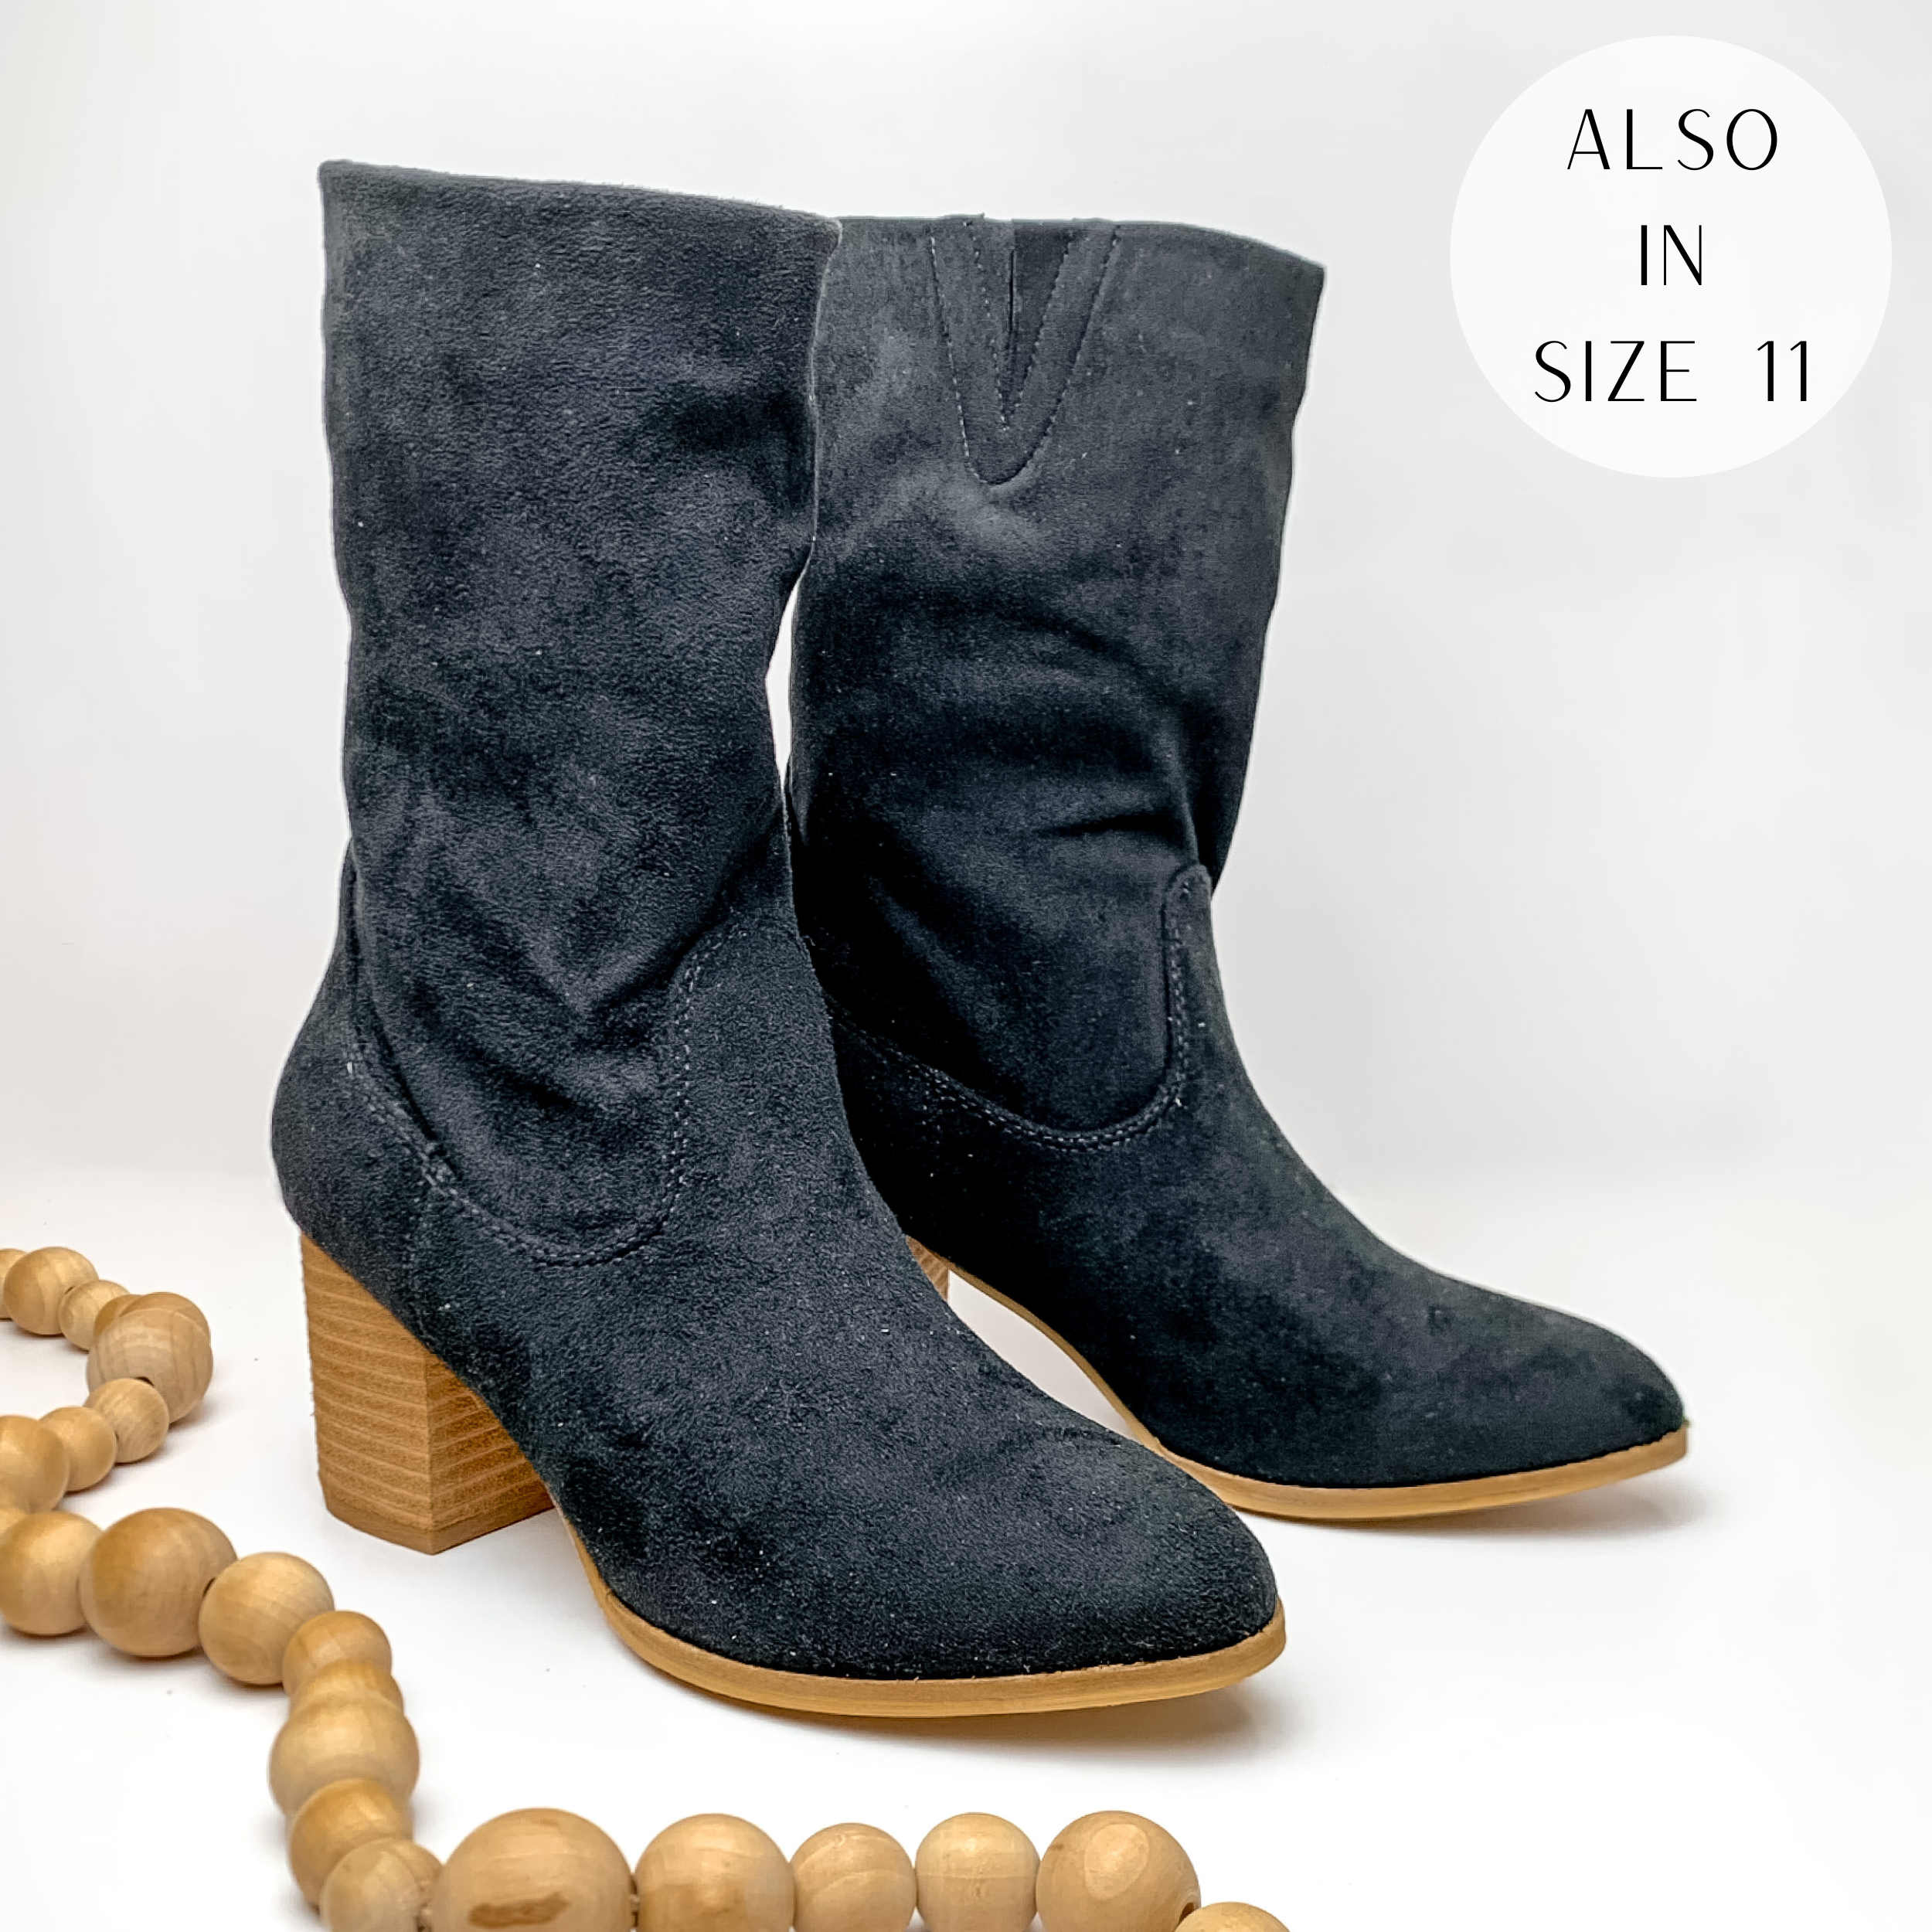 Suede calf booties with heel in black. Pictured on white background with light tan beads.